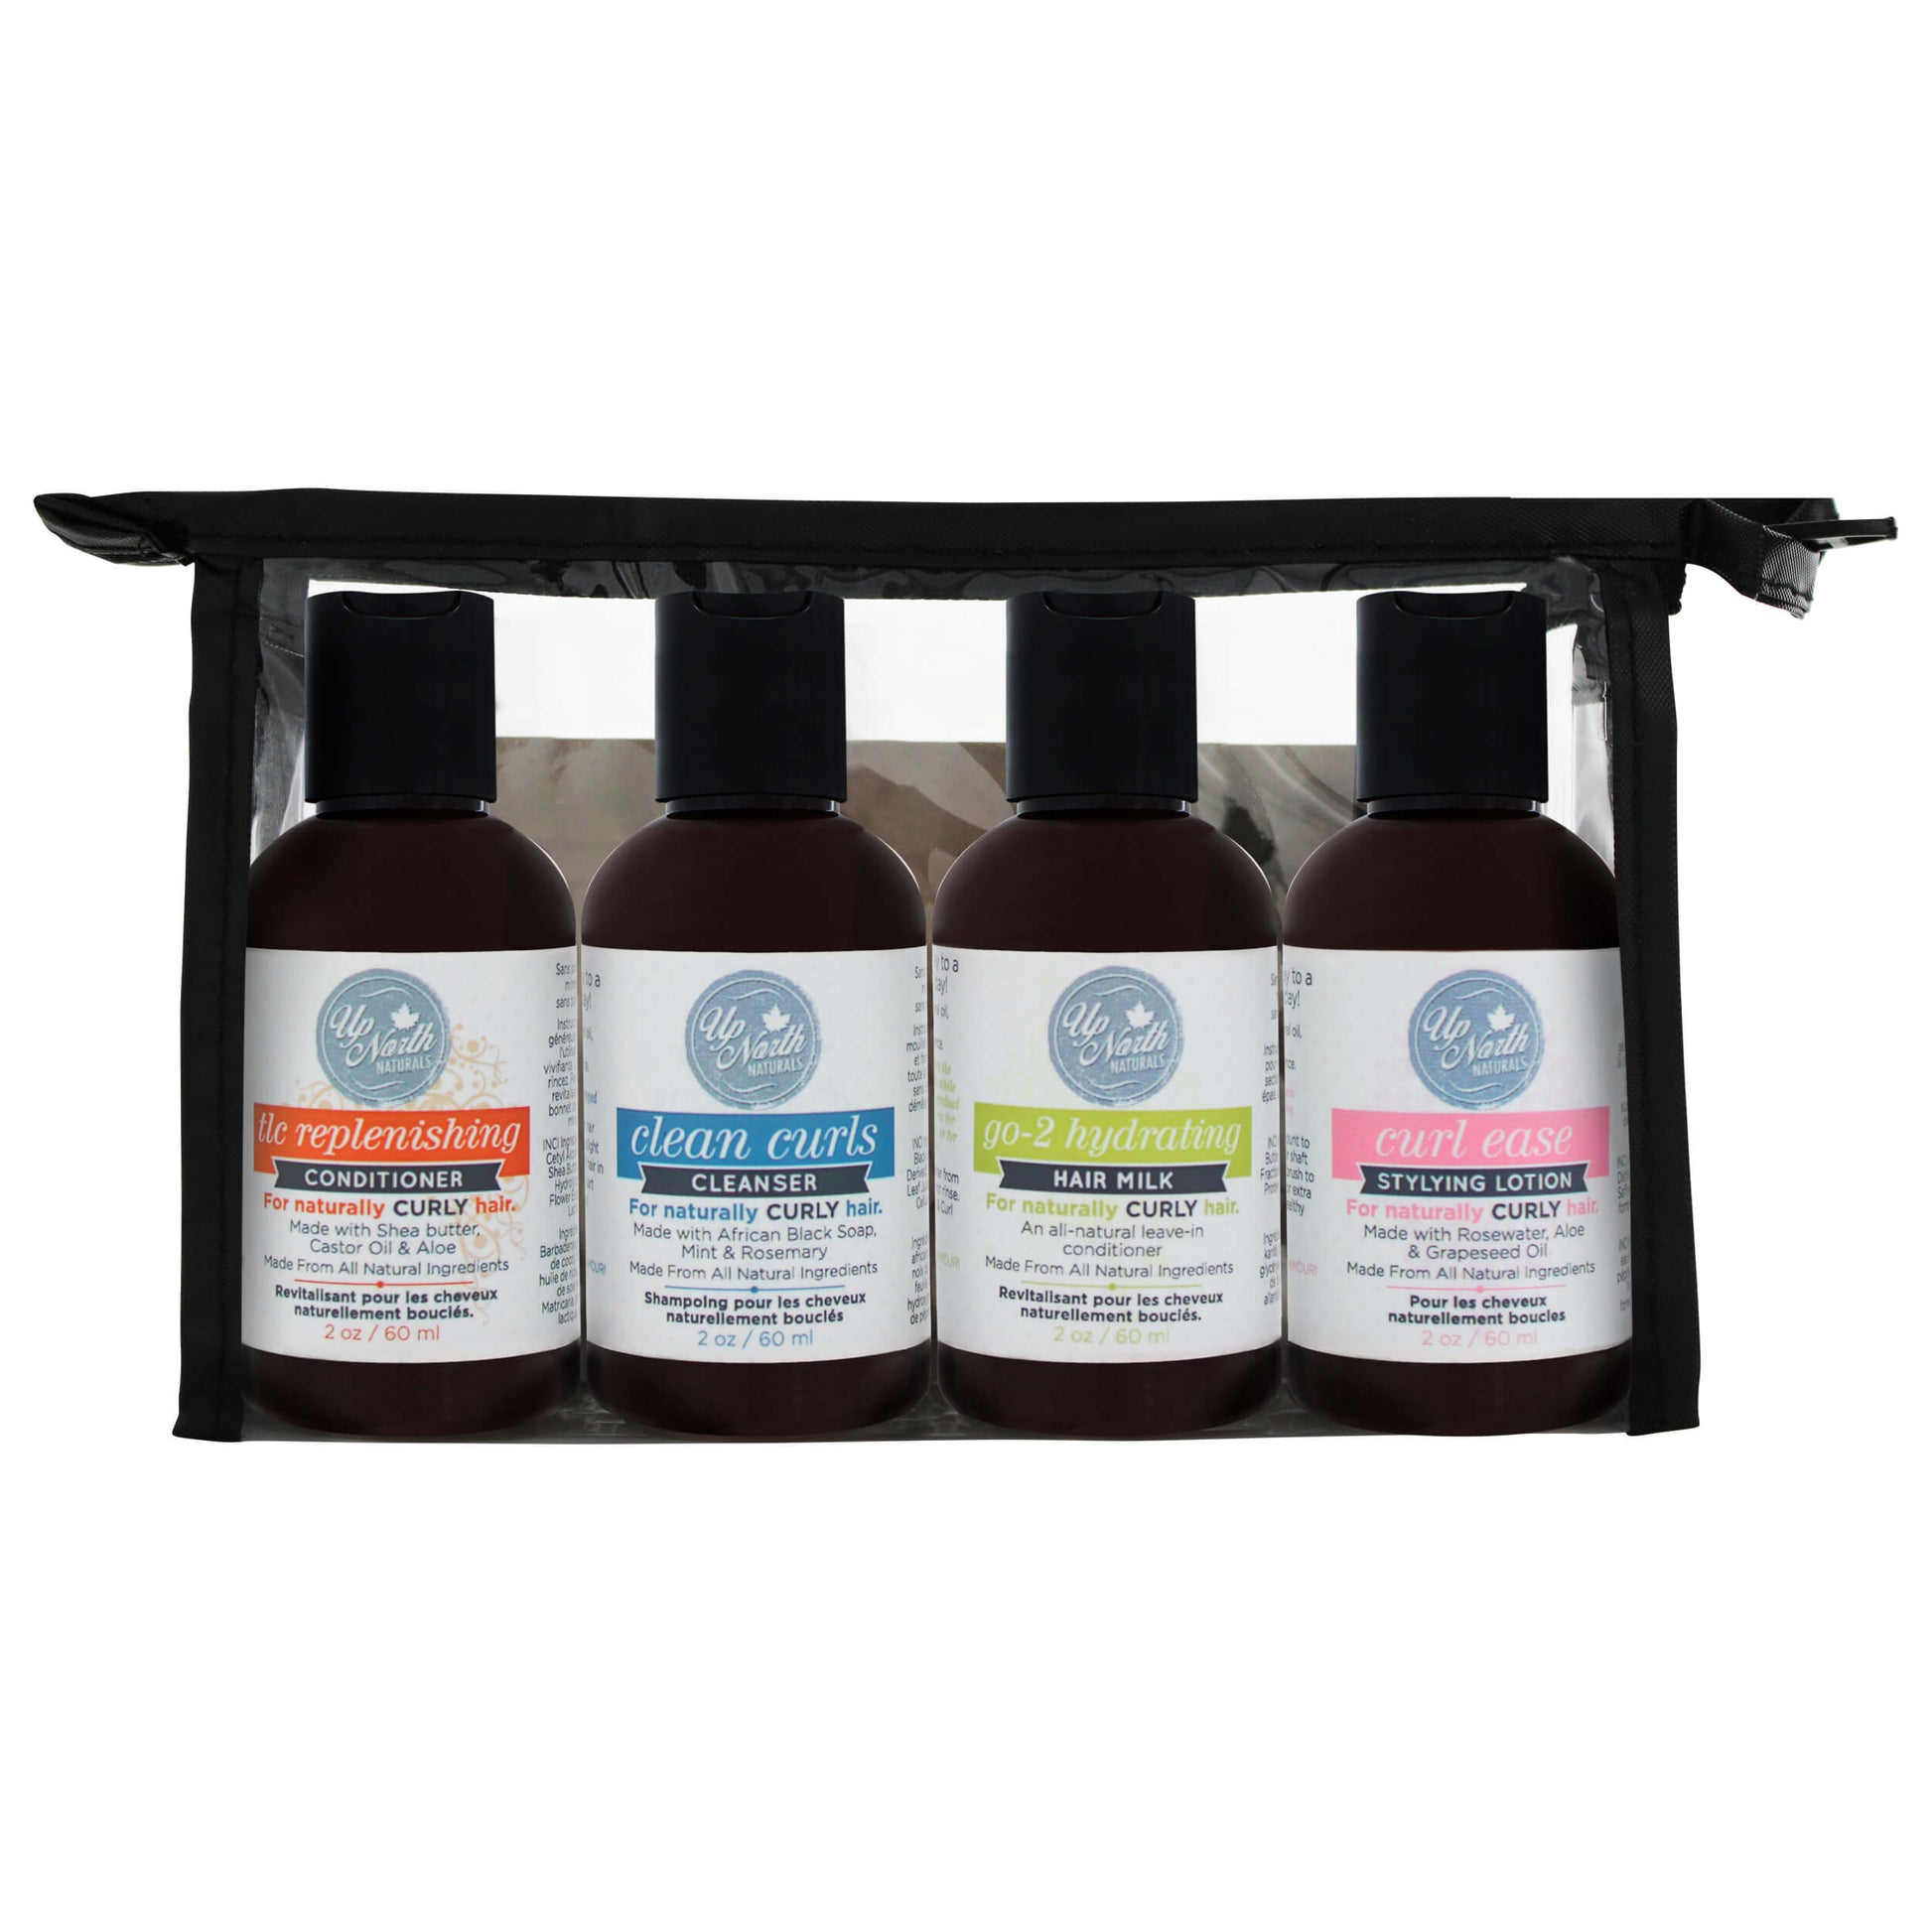 Front image of mini bundle products including the mini tlc replenishing conditioner, mini clean curls cleanser, mini go-2 hydrating milk, mini curl ease styling lotion in the included carrying case